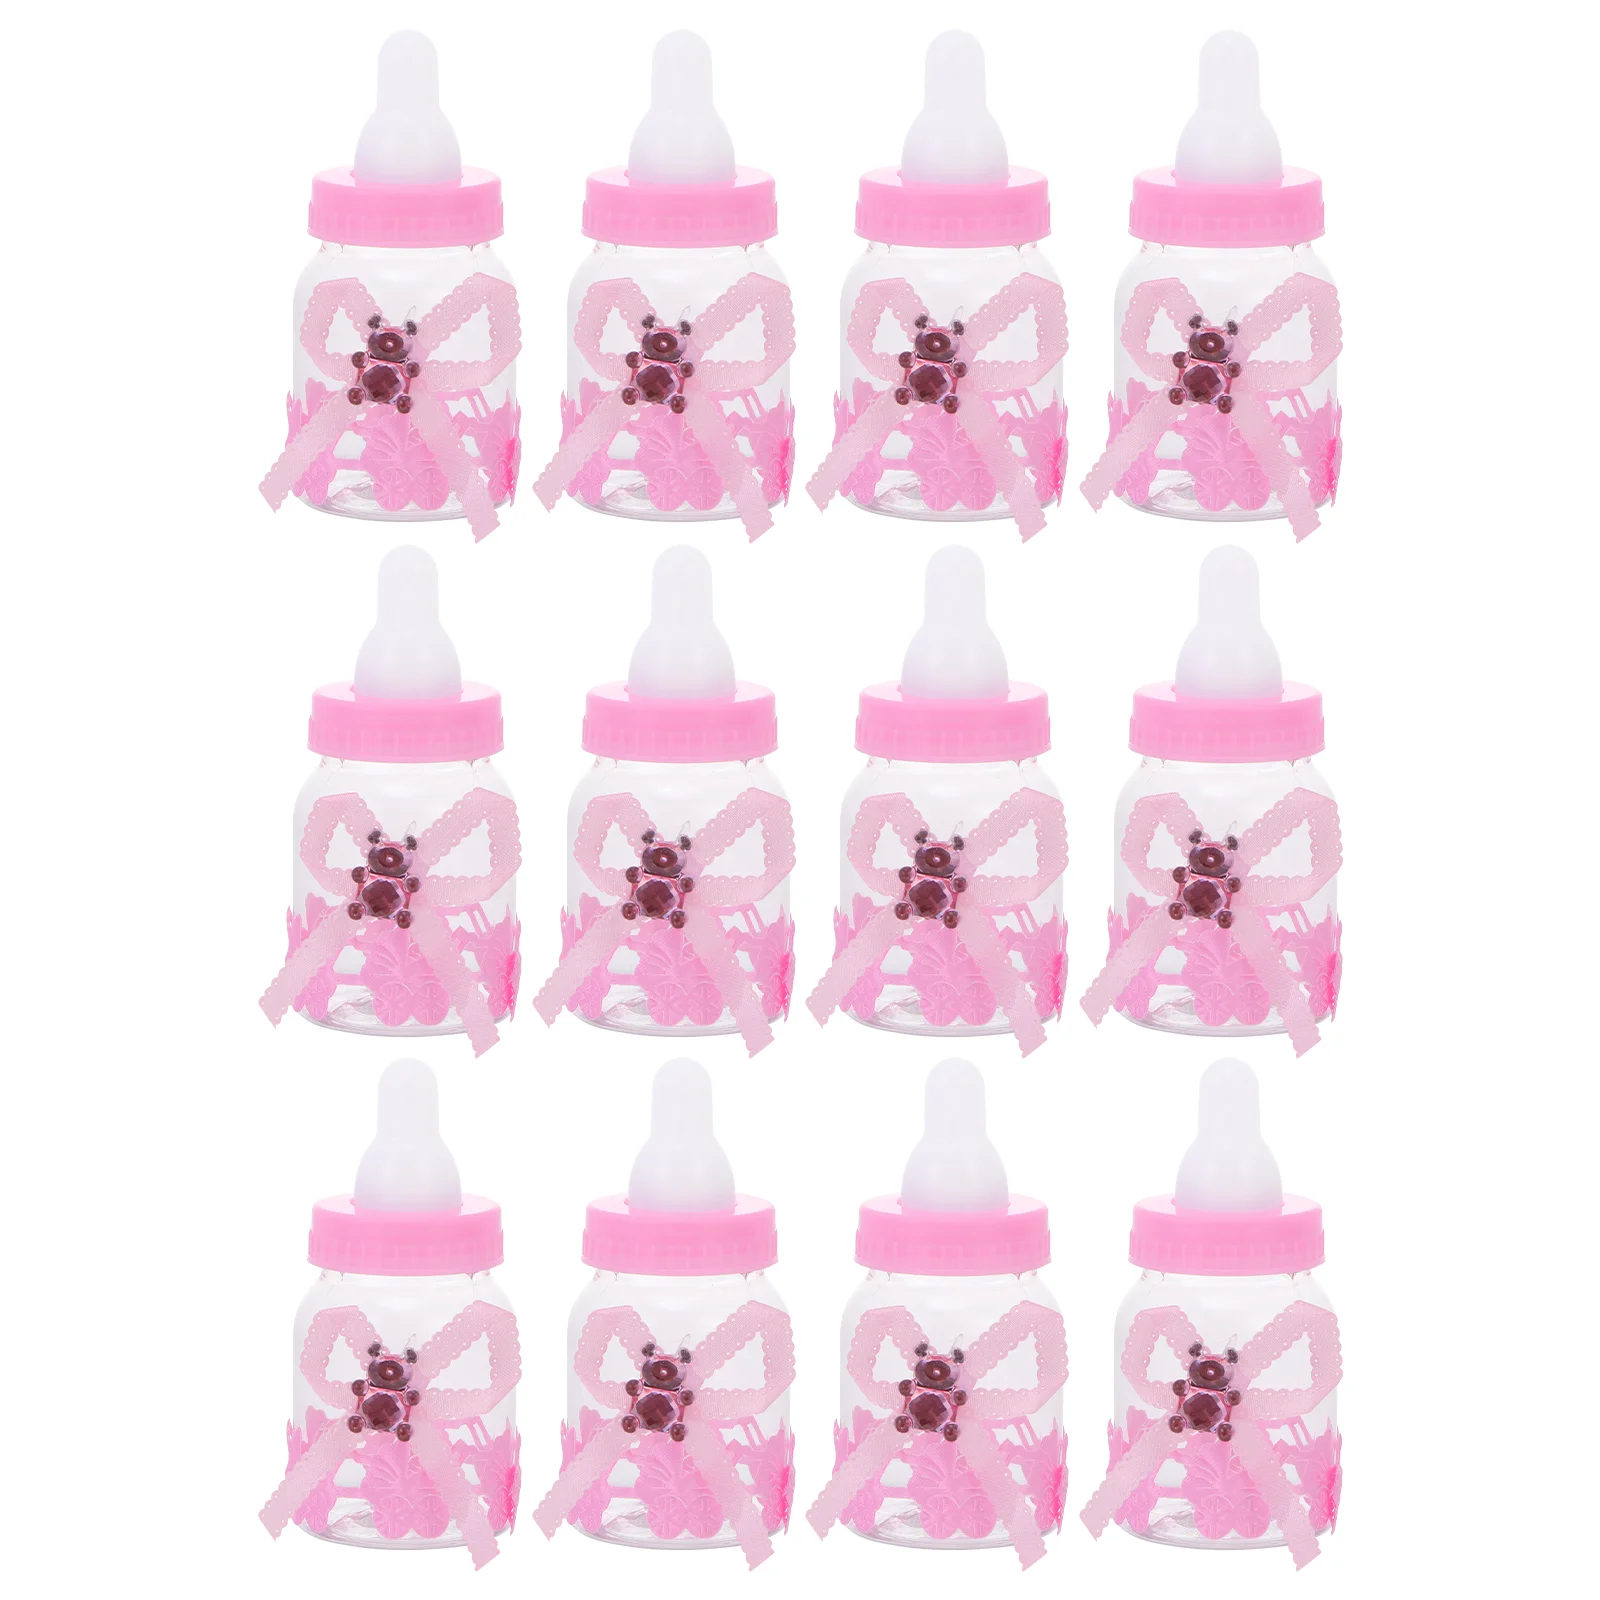 12Pcs Feeding Bottle Candy Boxes Fillable Baby Shower Favor Decoration Party Boxes Supplies